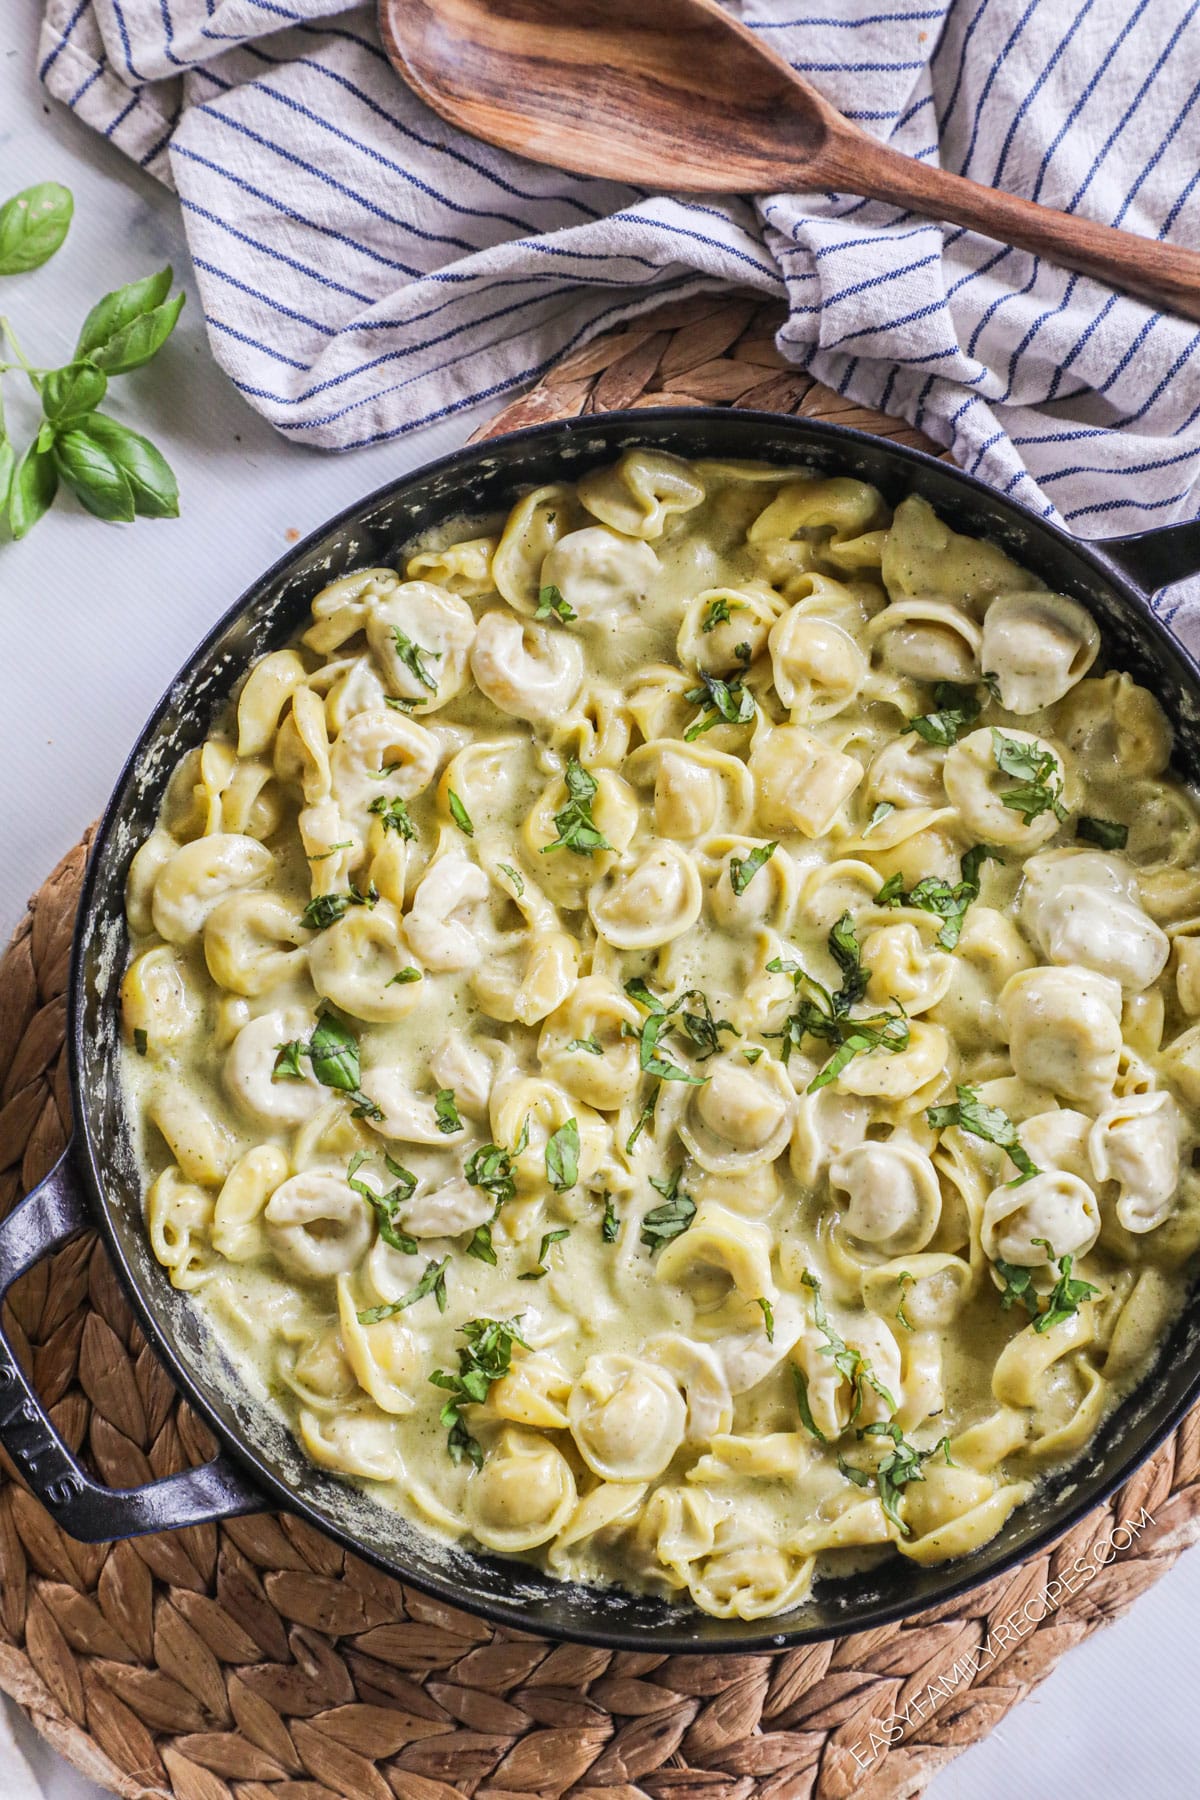 a large pan of creamy pesto sauce tossed with tortellini.